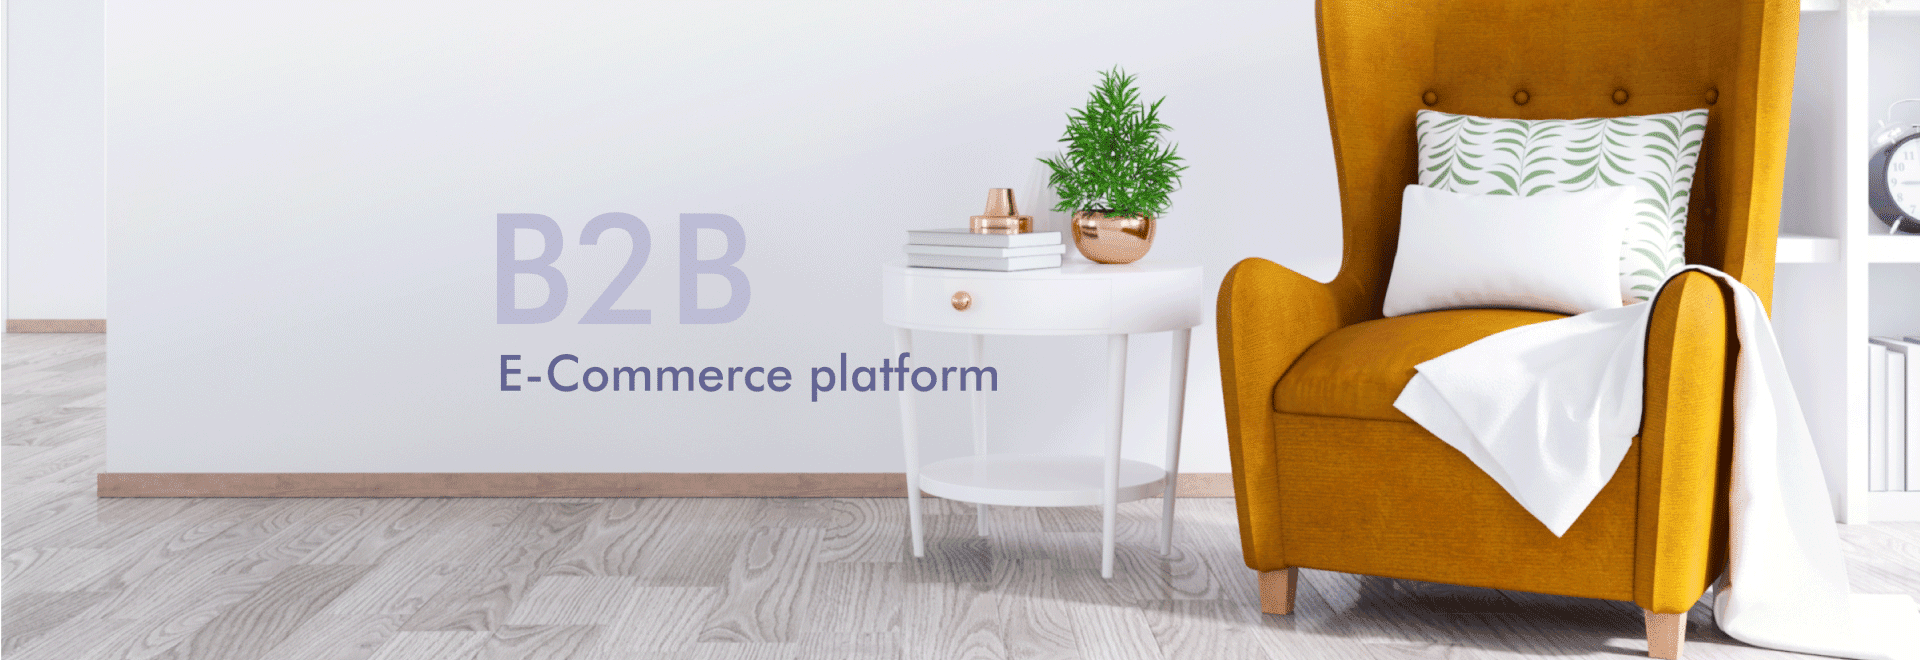 Acuver helped lndia’s leading furniture retailer introduce <br>a B2B E-Commerce platform